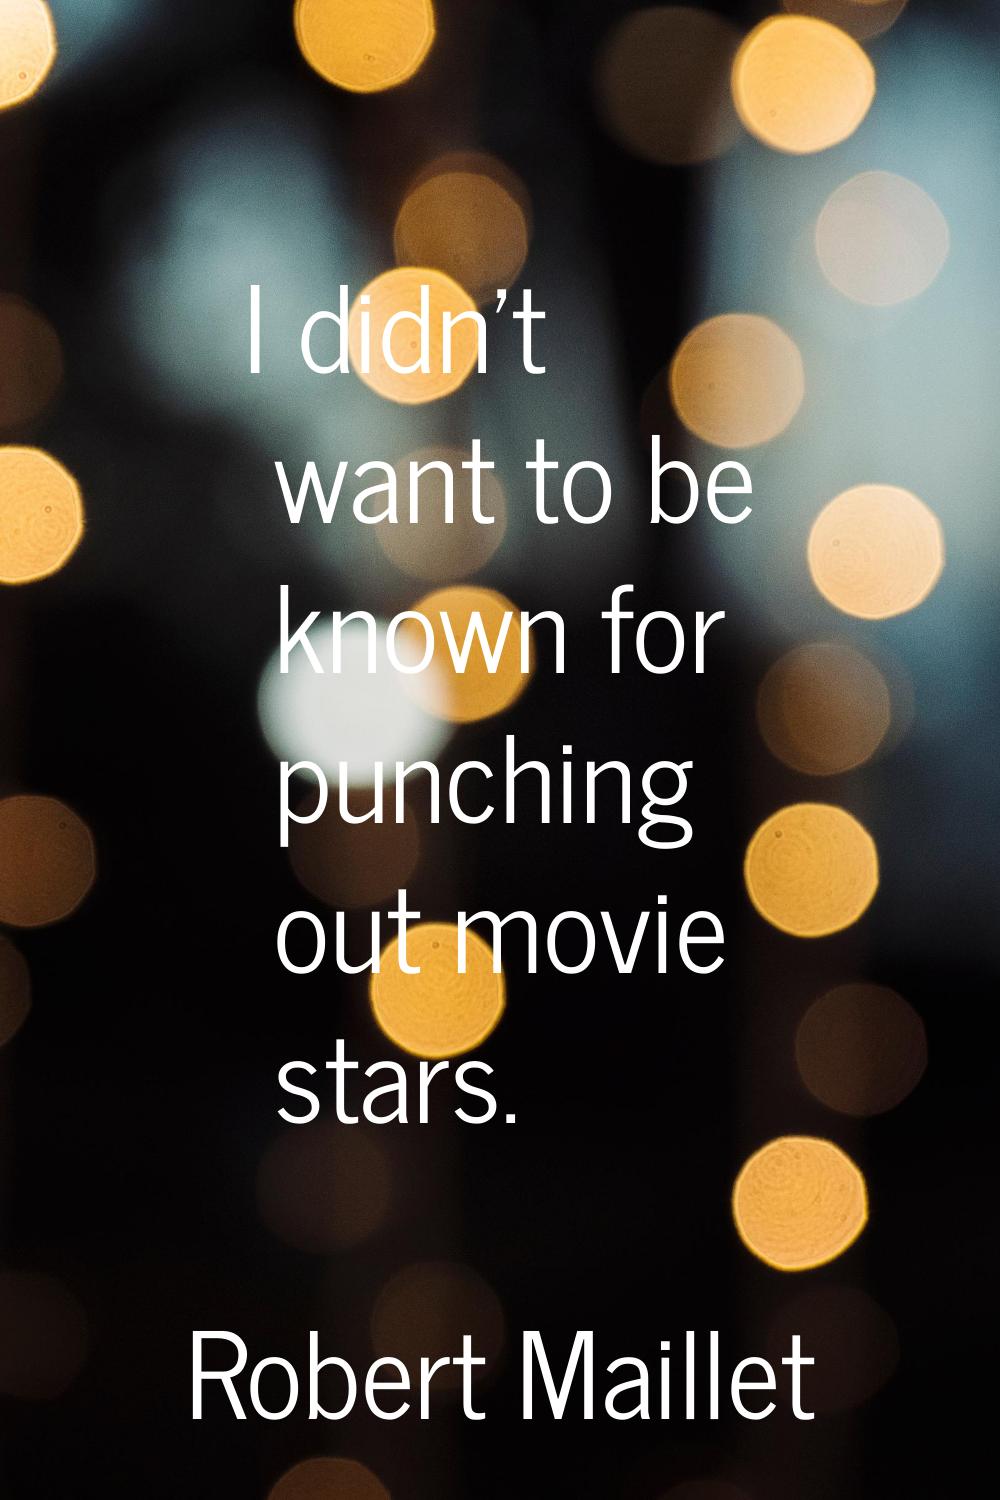 I didn't want to be known for punching out movie stars.